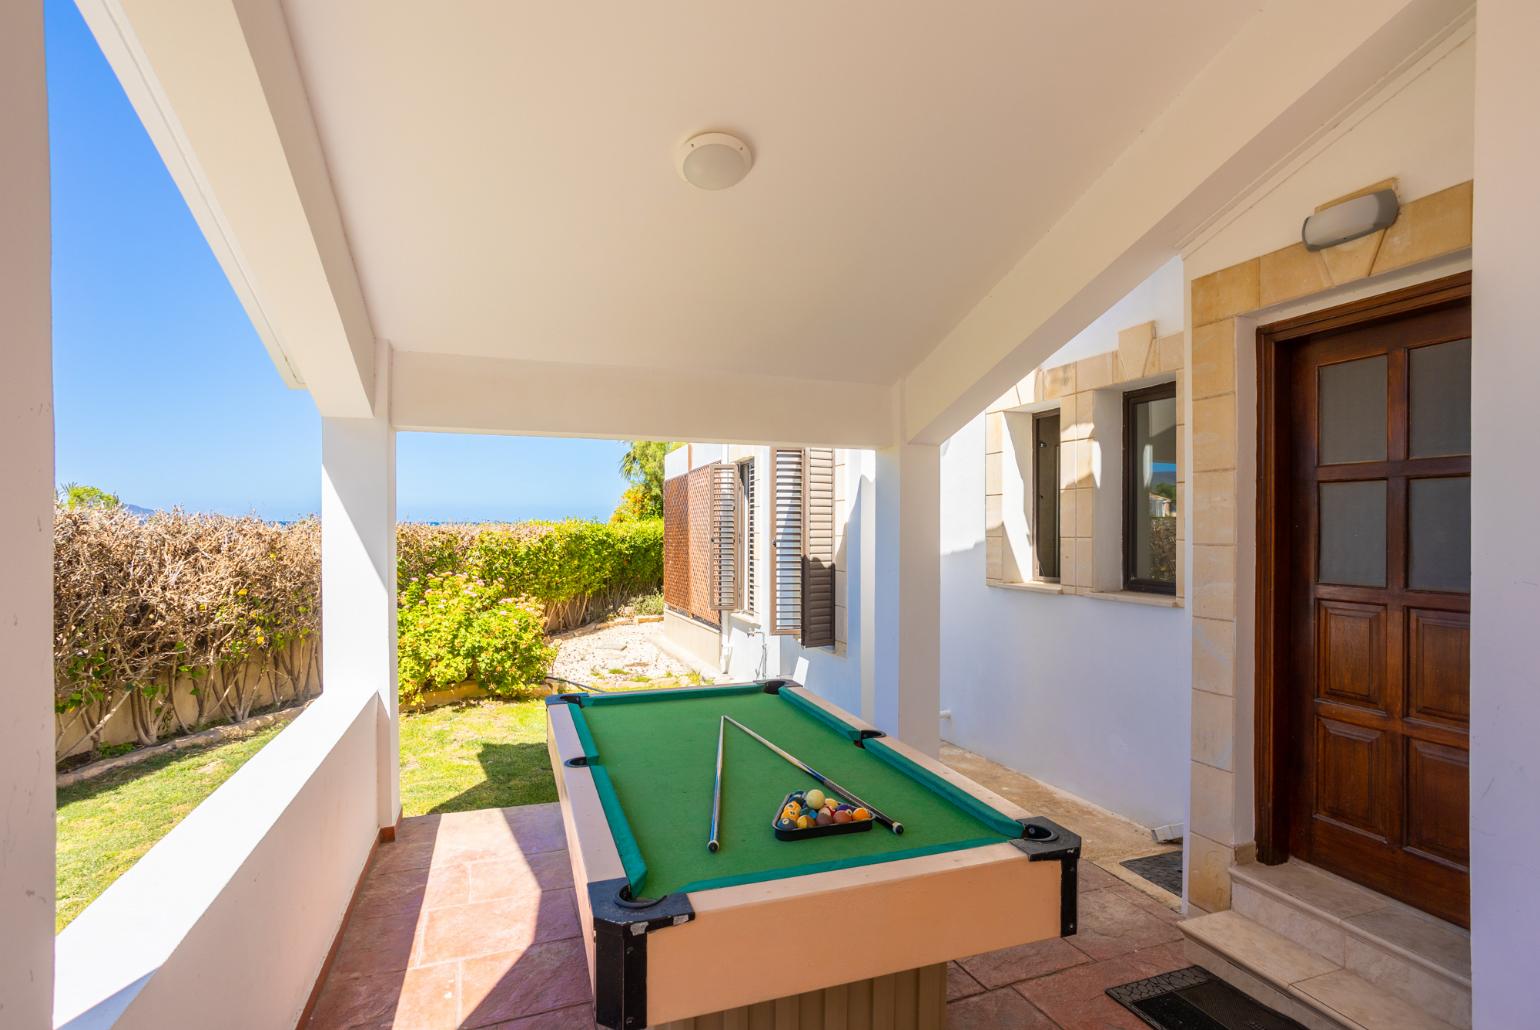 Terrace area with pool table